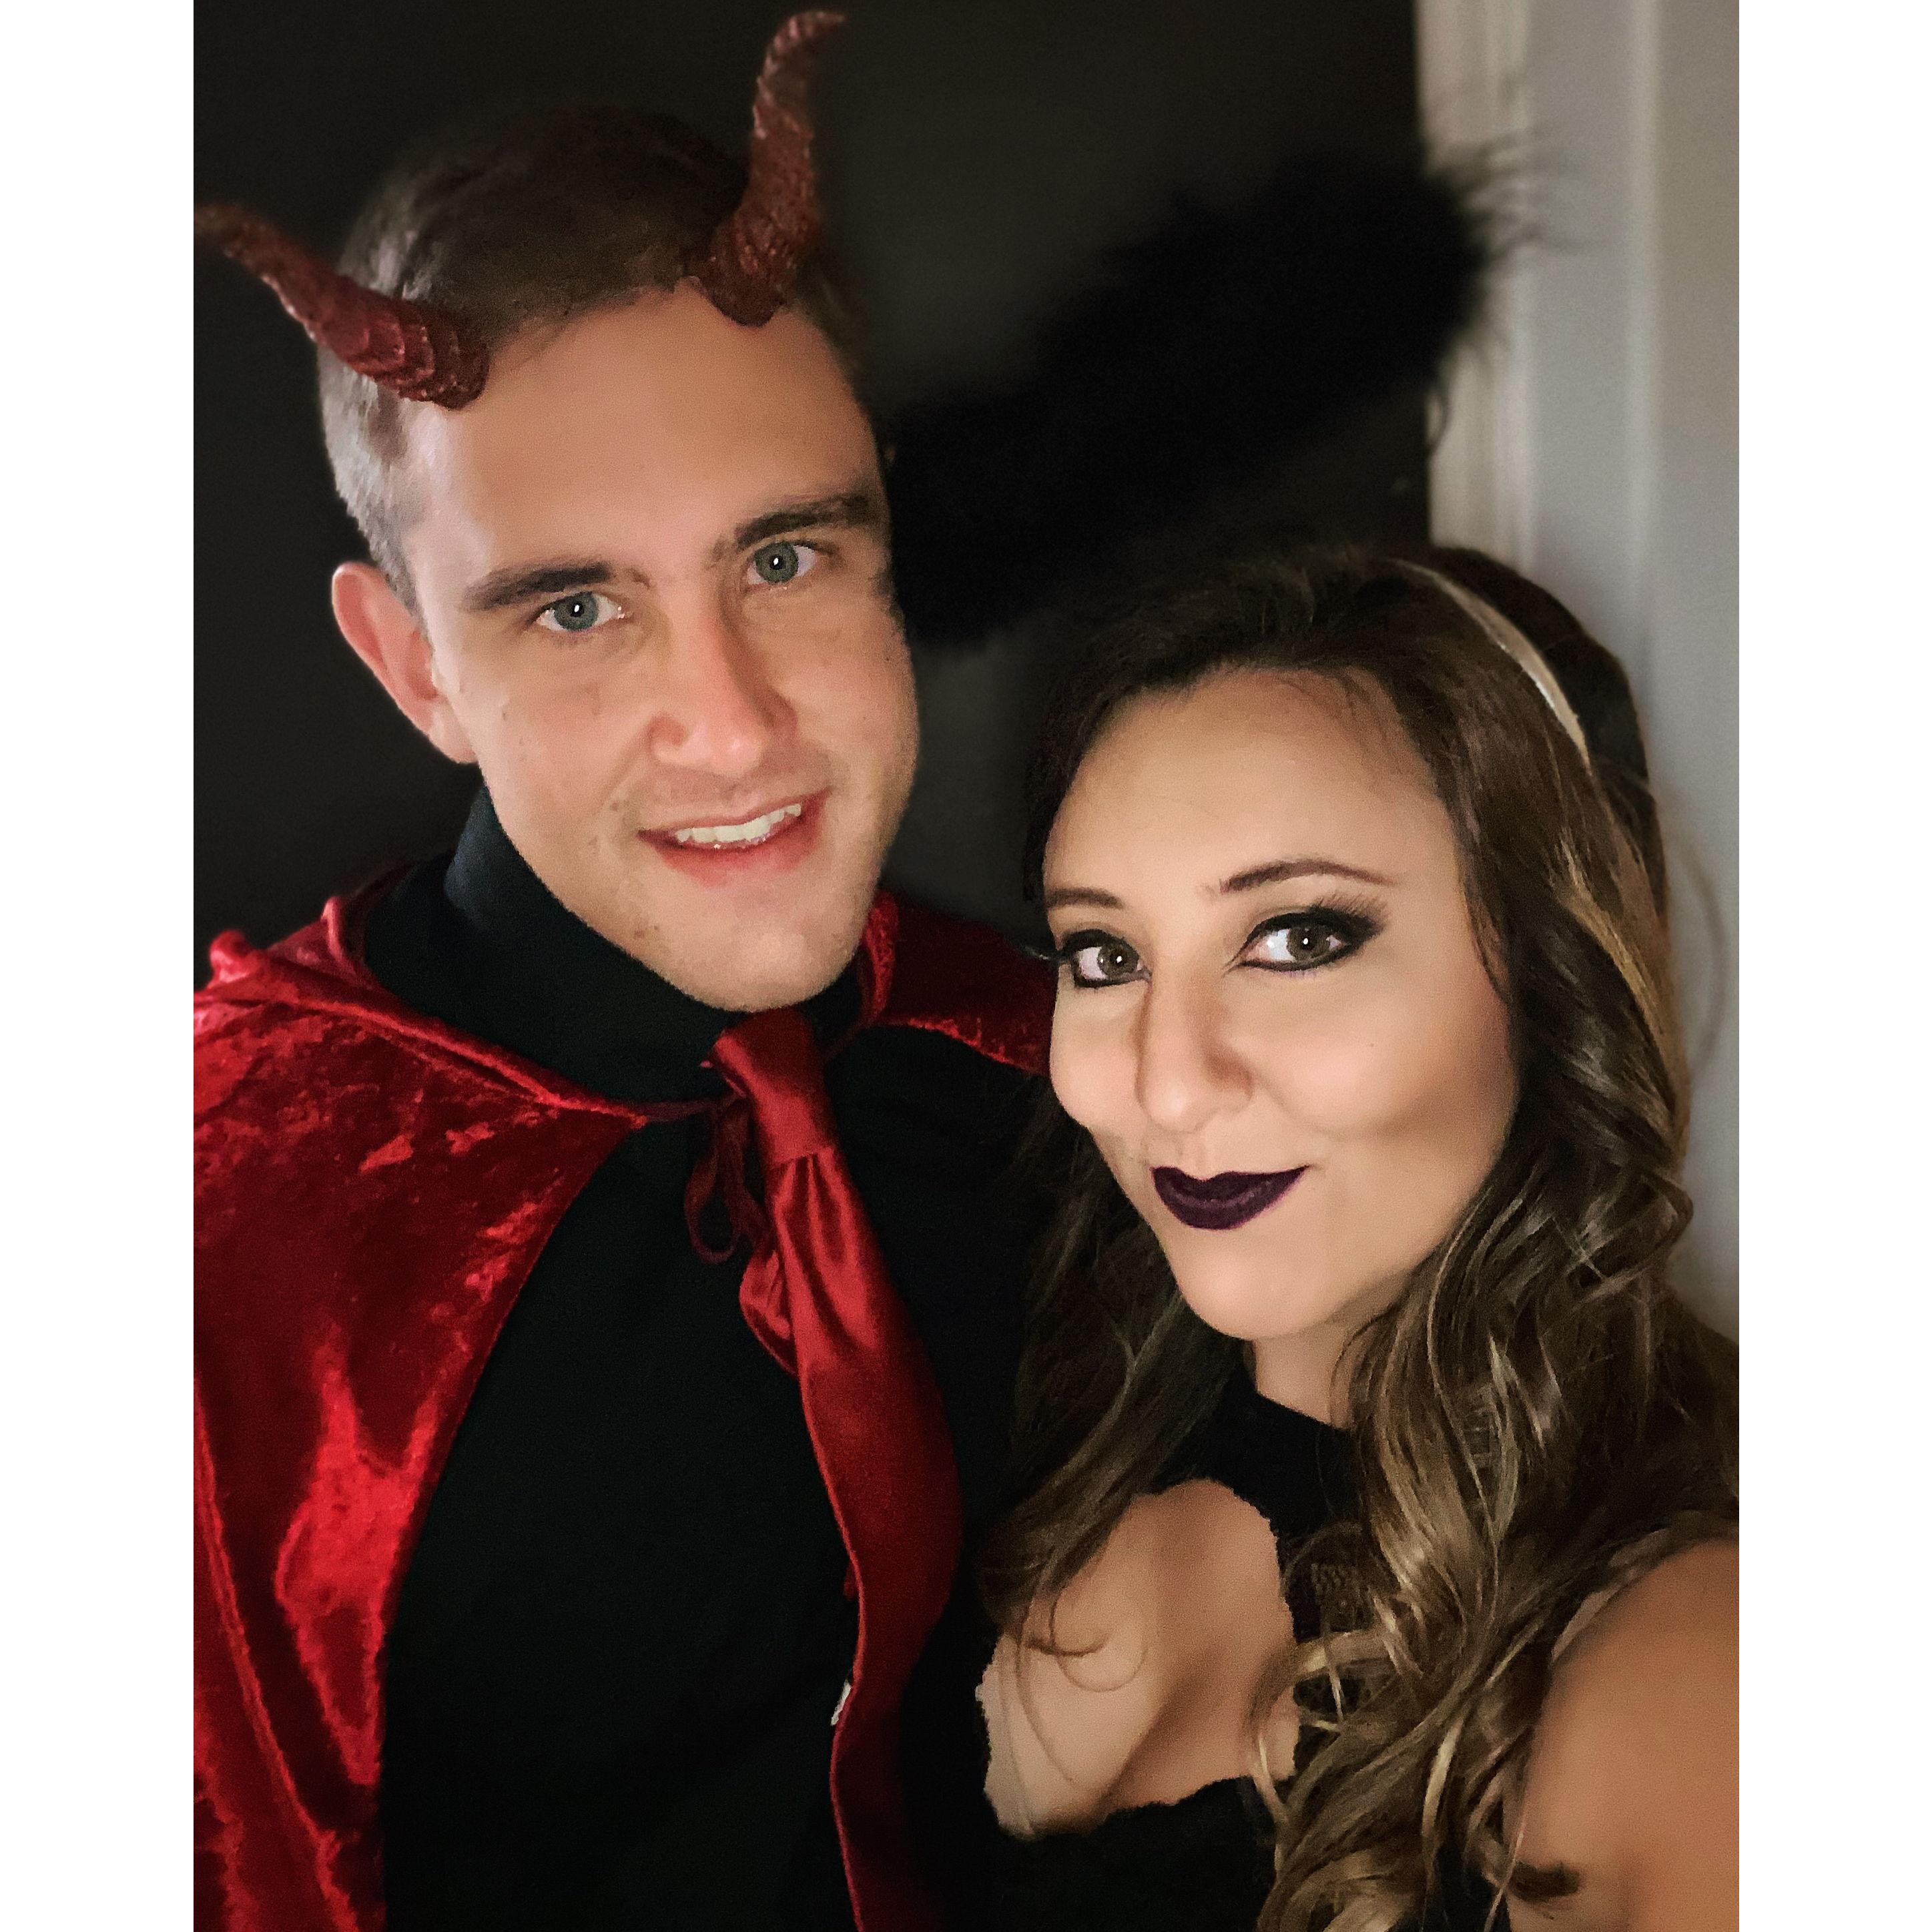 Fred and Jordan never pass up an opportunity to dress up together for Halloween. Circa 2019, the two dress up as The Devil (Fred) and his Fallen Angel (Jordan).